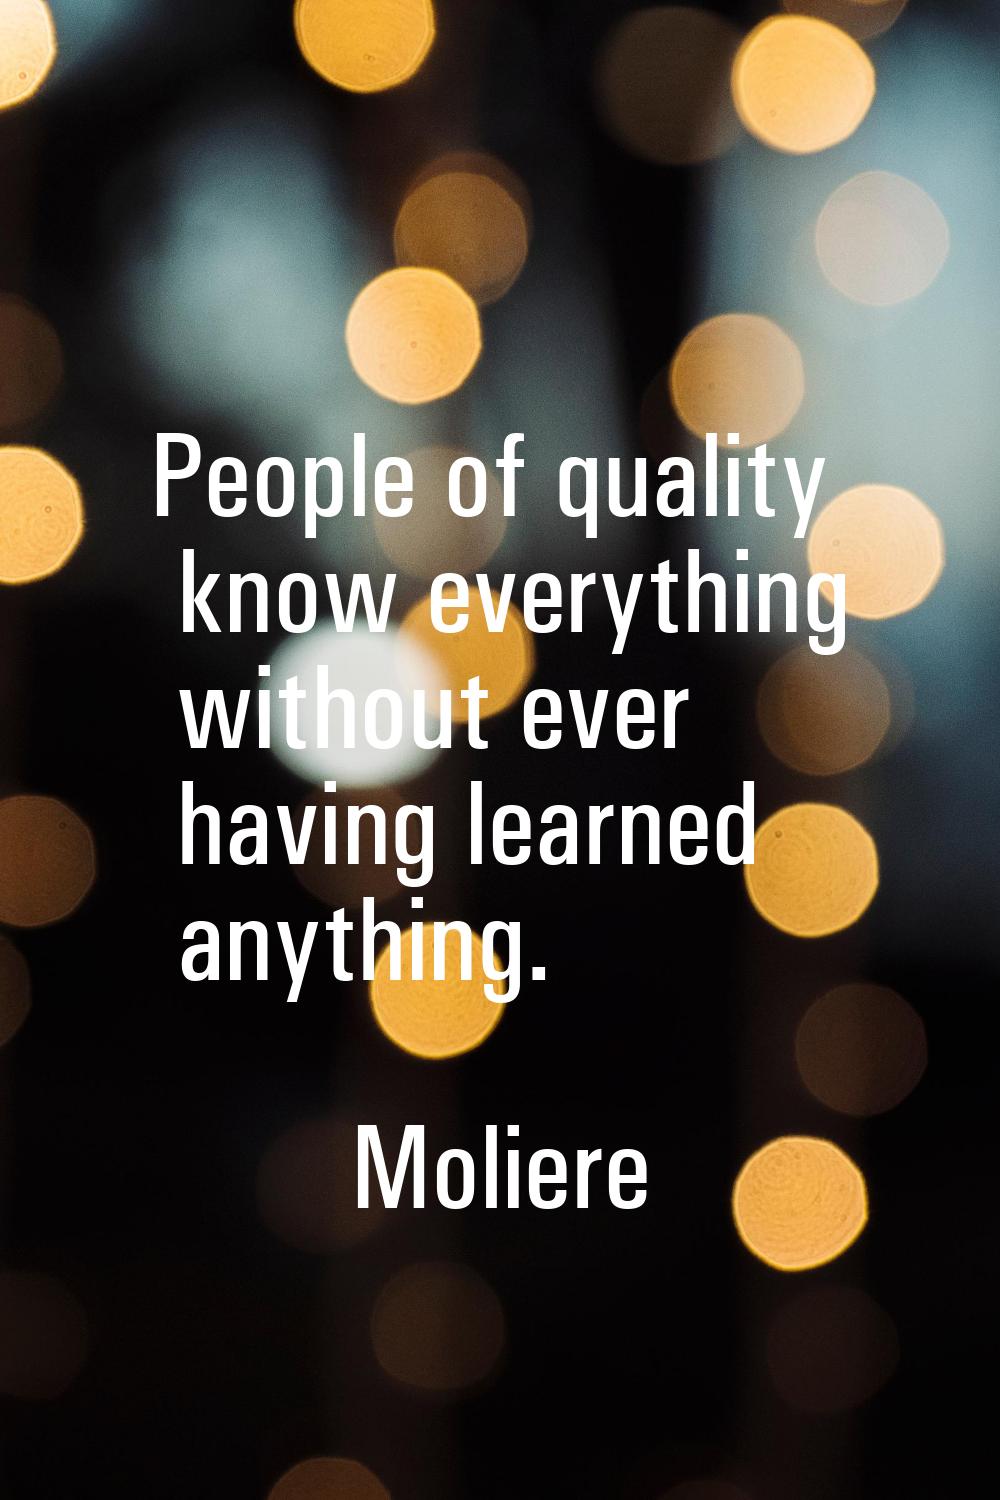 People of quality know everything without ever having learned anything.